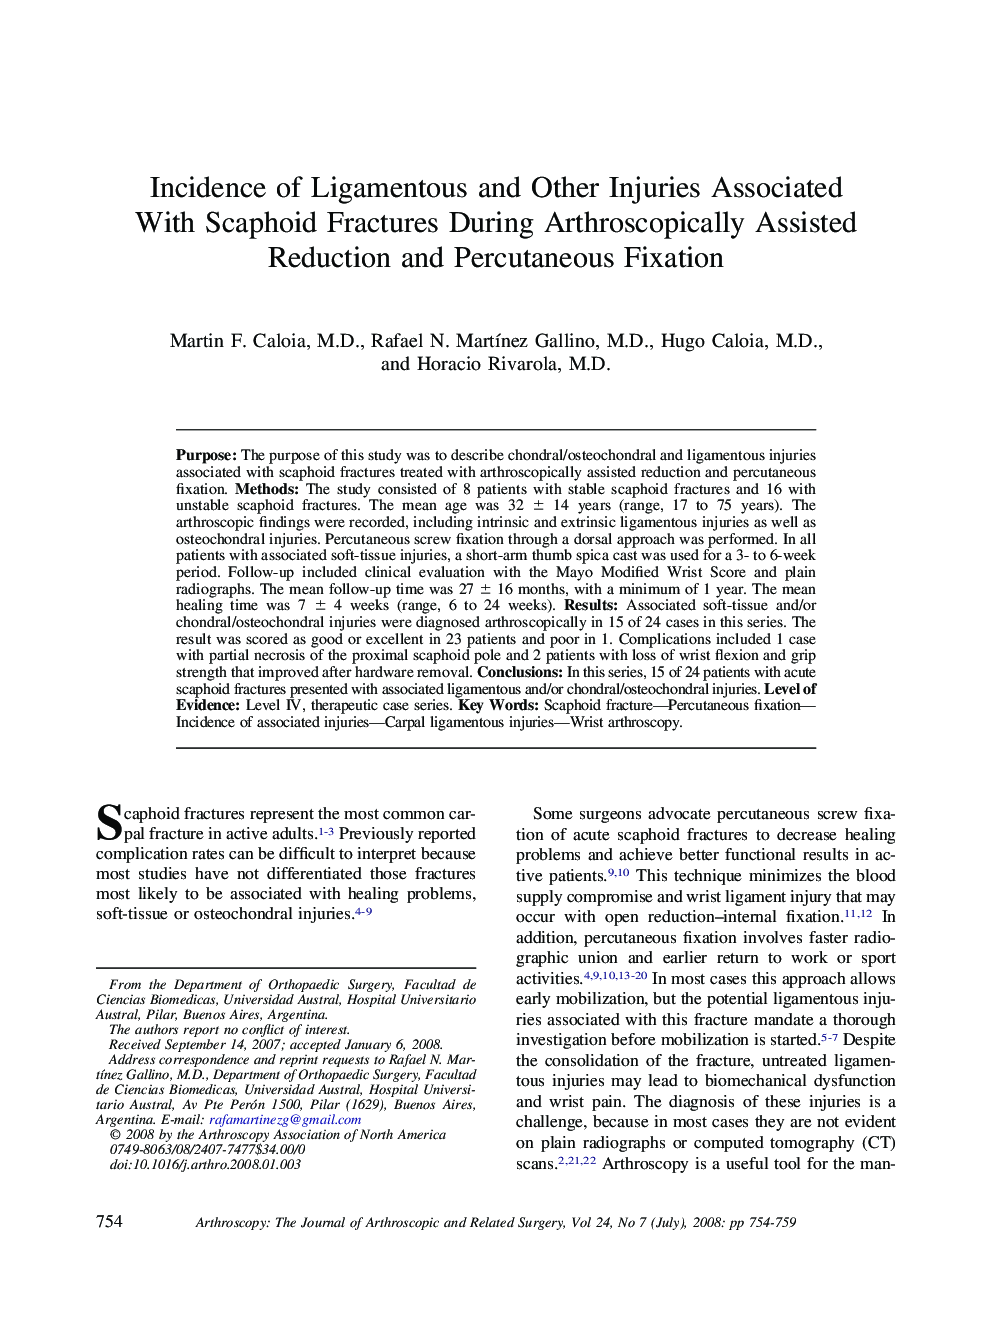 Incidence of Ligamentous and Other Injuries Associated With Scaphoid Fractures During Arthroscopically Assisted Reduction and Percutaneous Fixation 